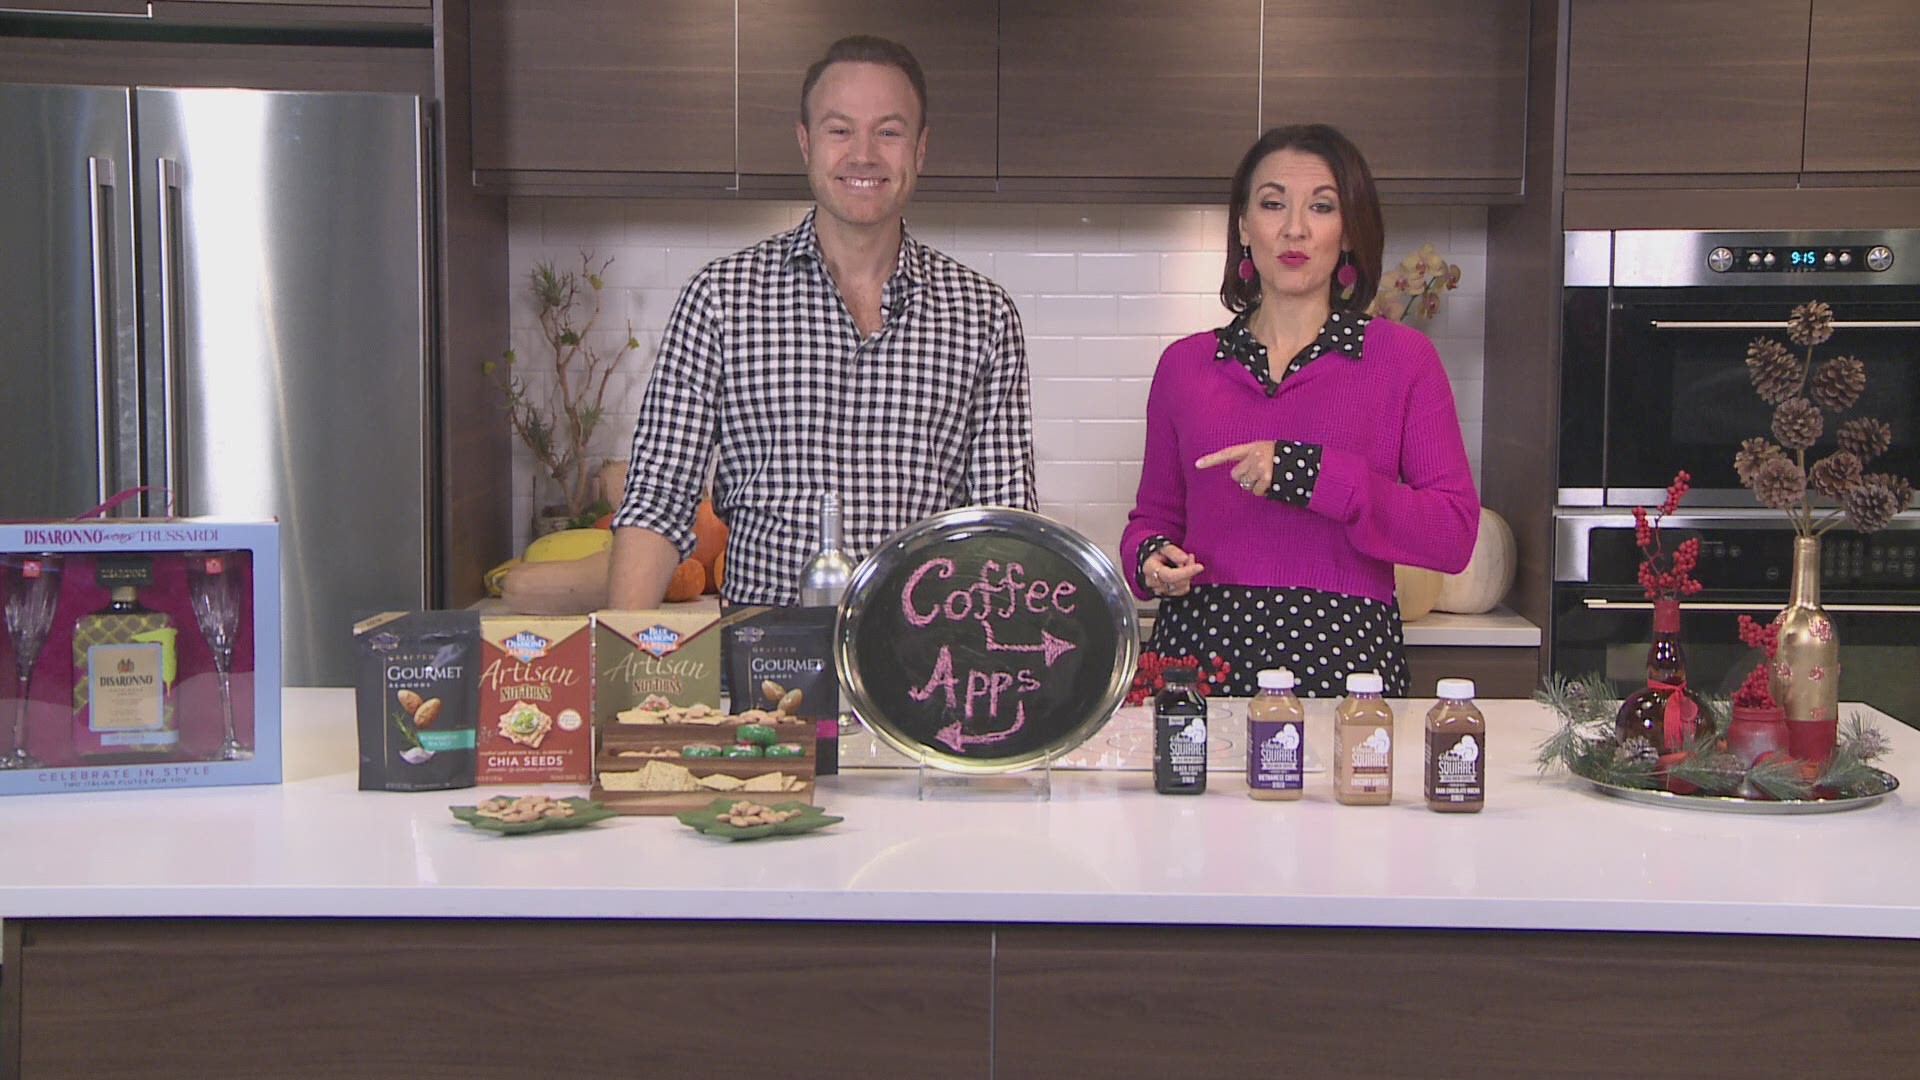 Party planner Paul Zahn gives us fun and affordable ways to spice up any holiday party!